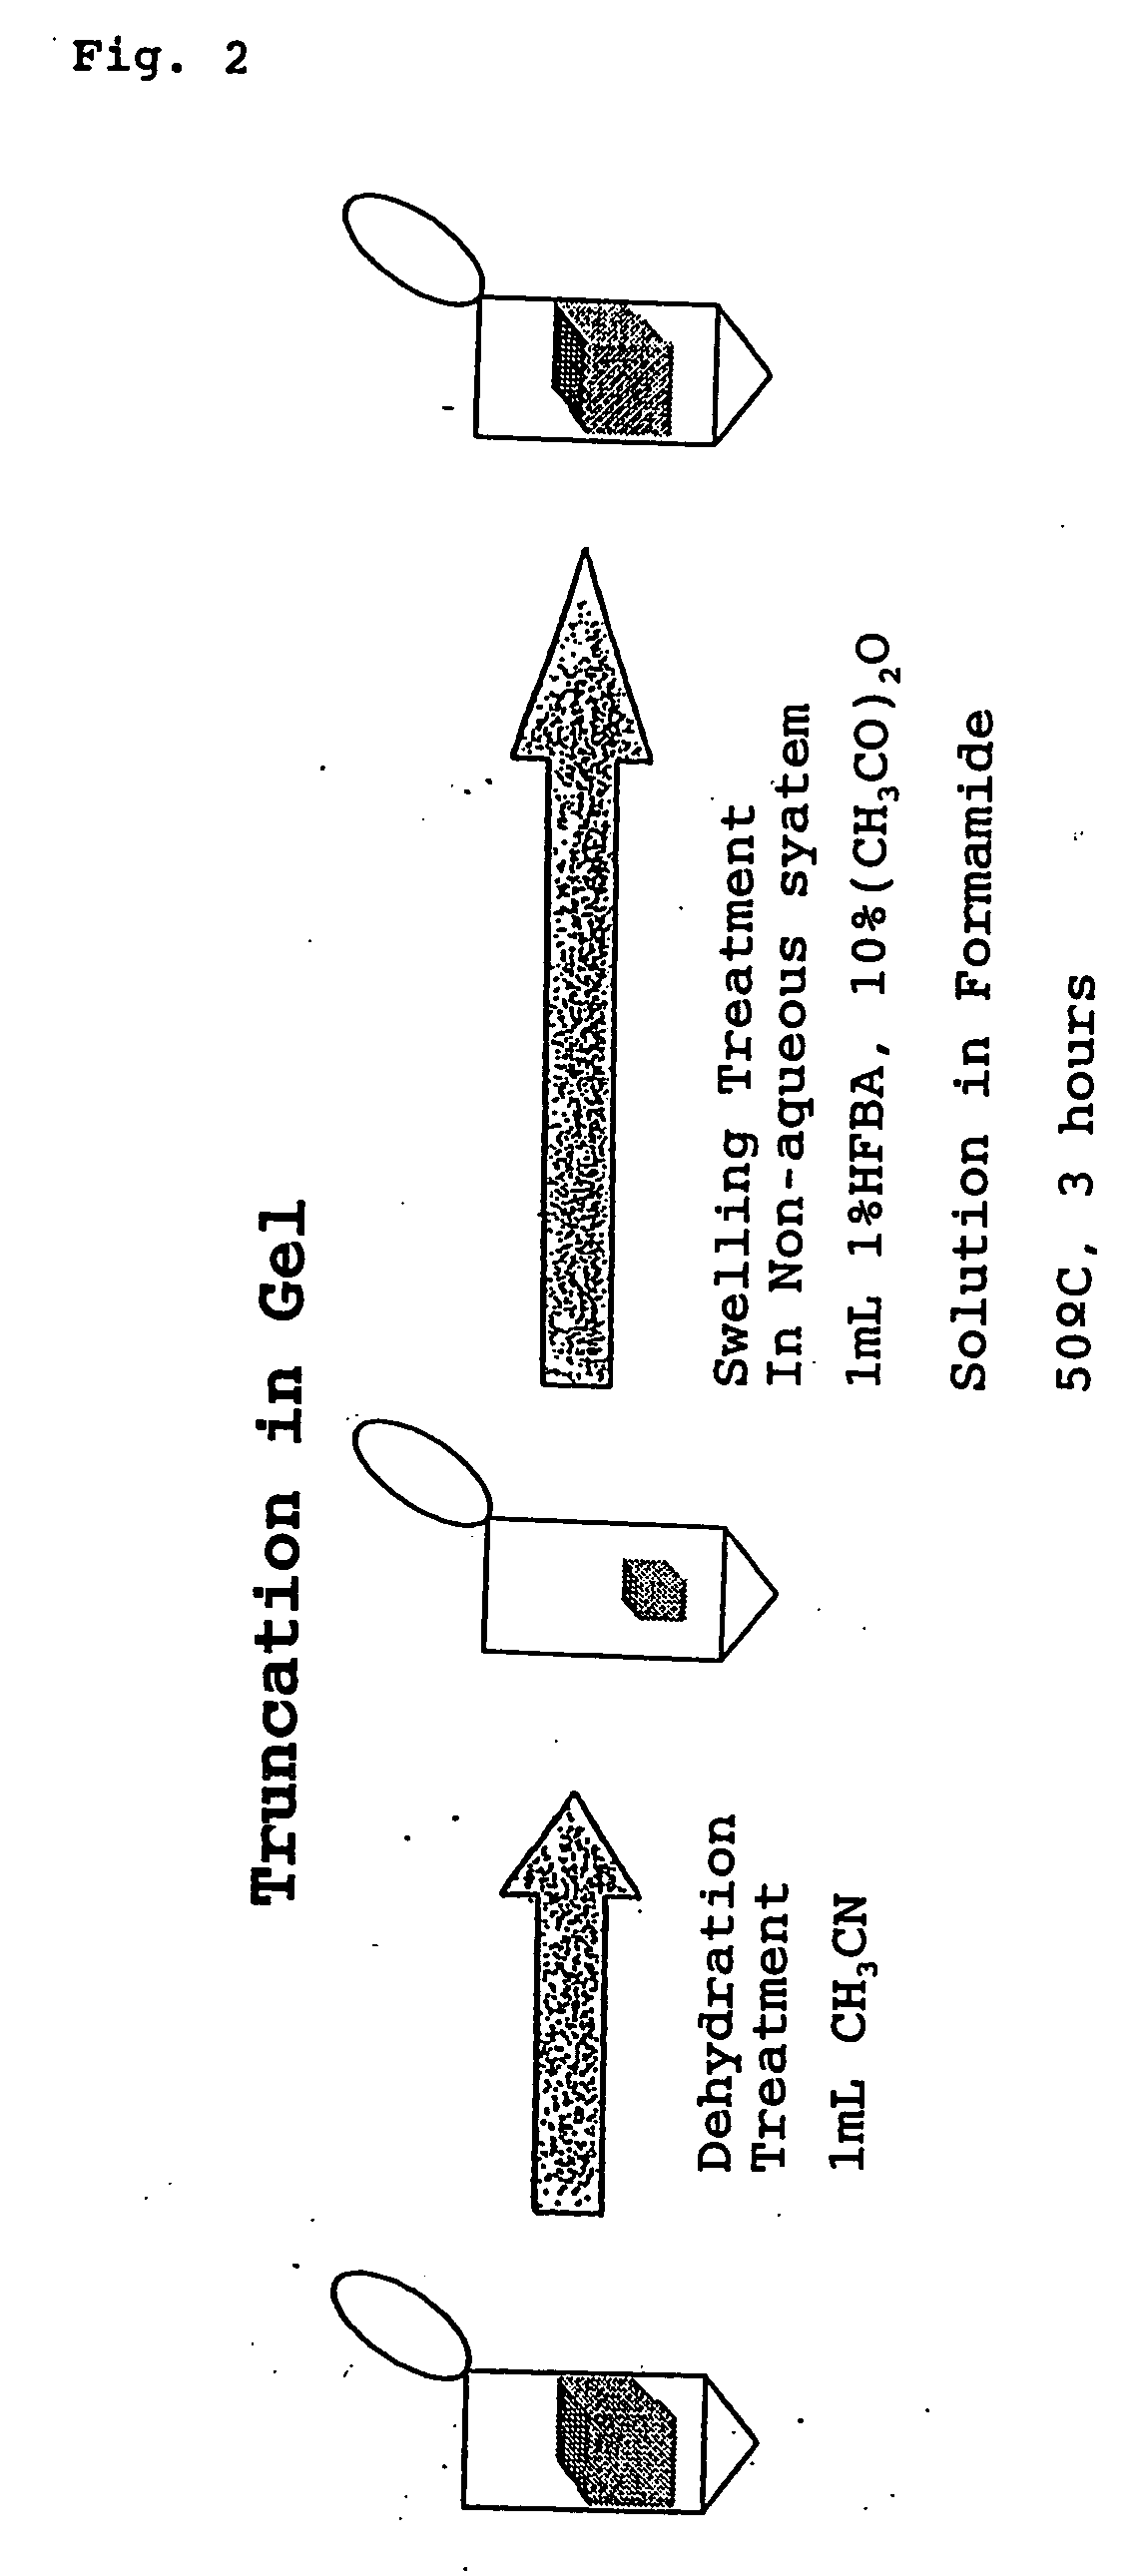 Method for analyzing c-terminal amino acid sequence of peptide using mass spectrometry